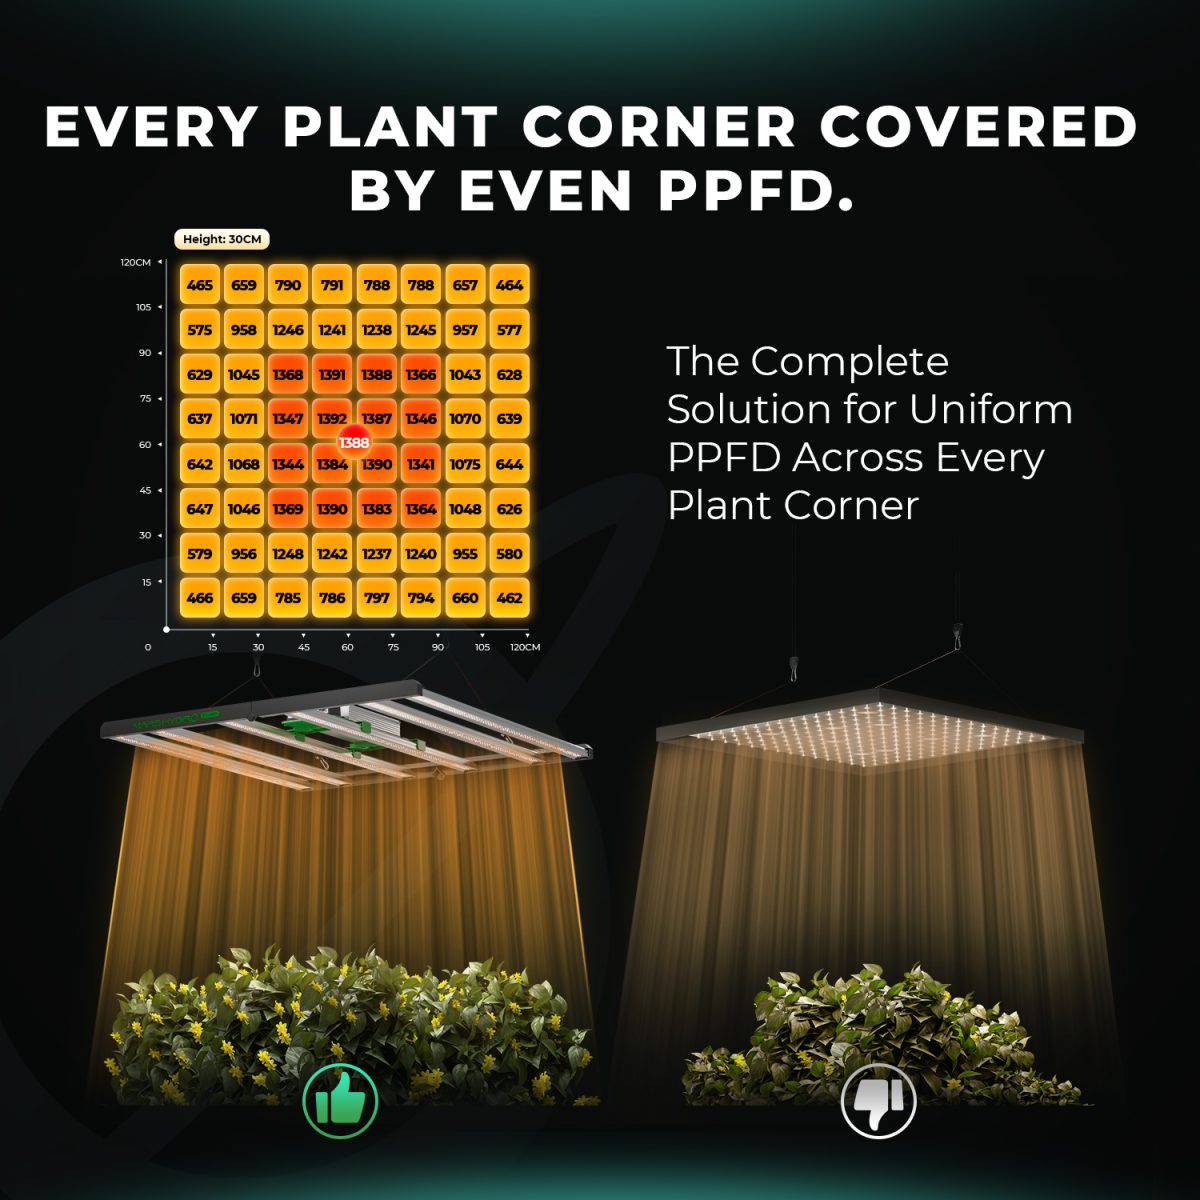 Evey plant corner covered by even PPFD-cm